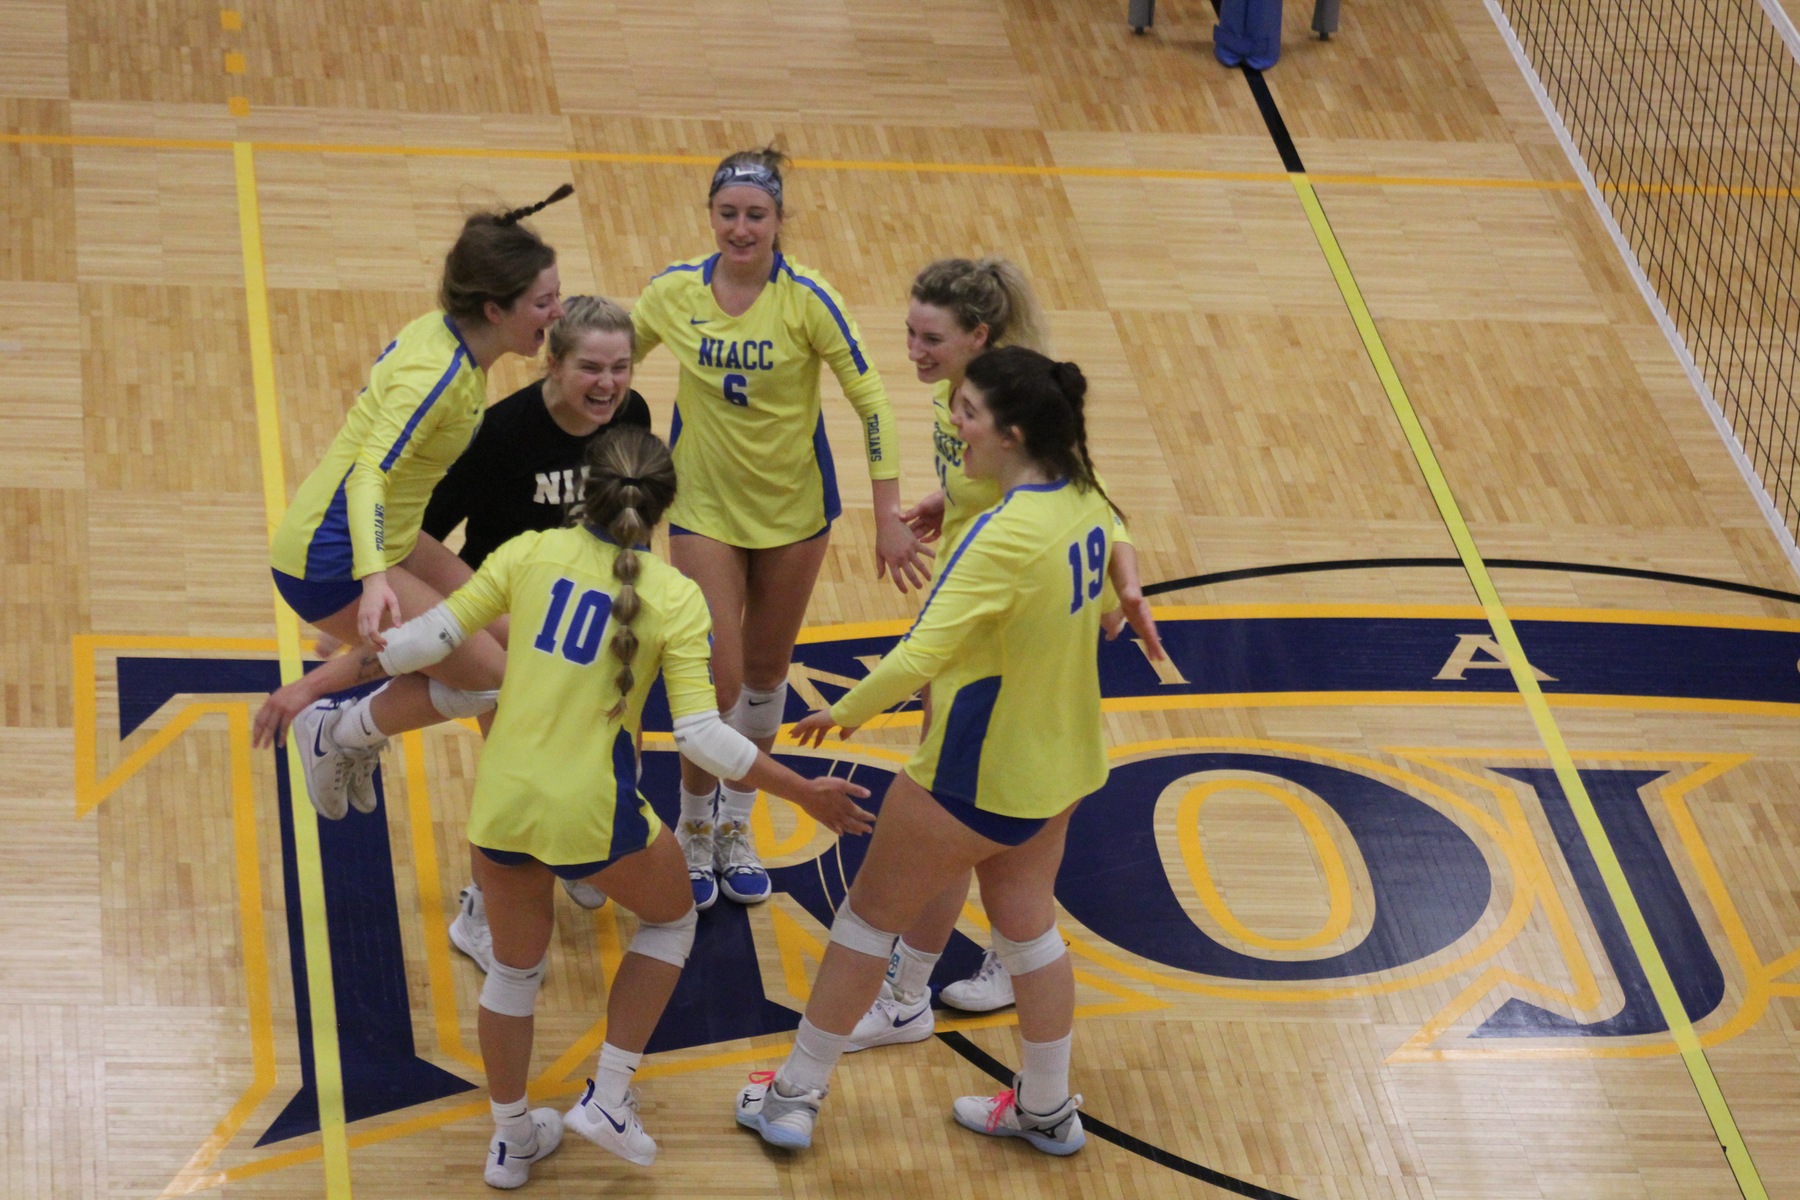 NIACC celebrates match point against Southeastern in the opening round of the regional tournament Saturday.